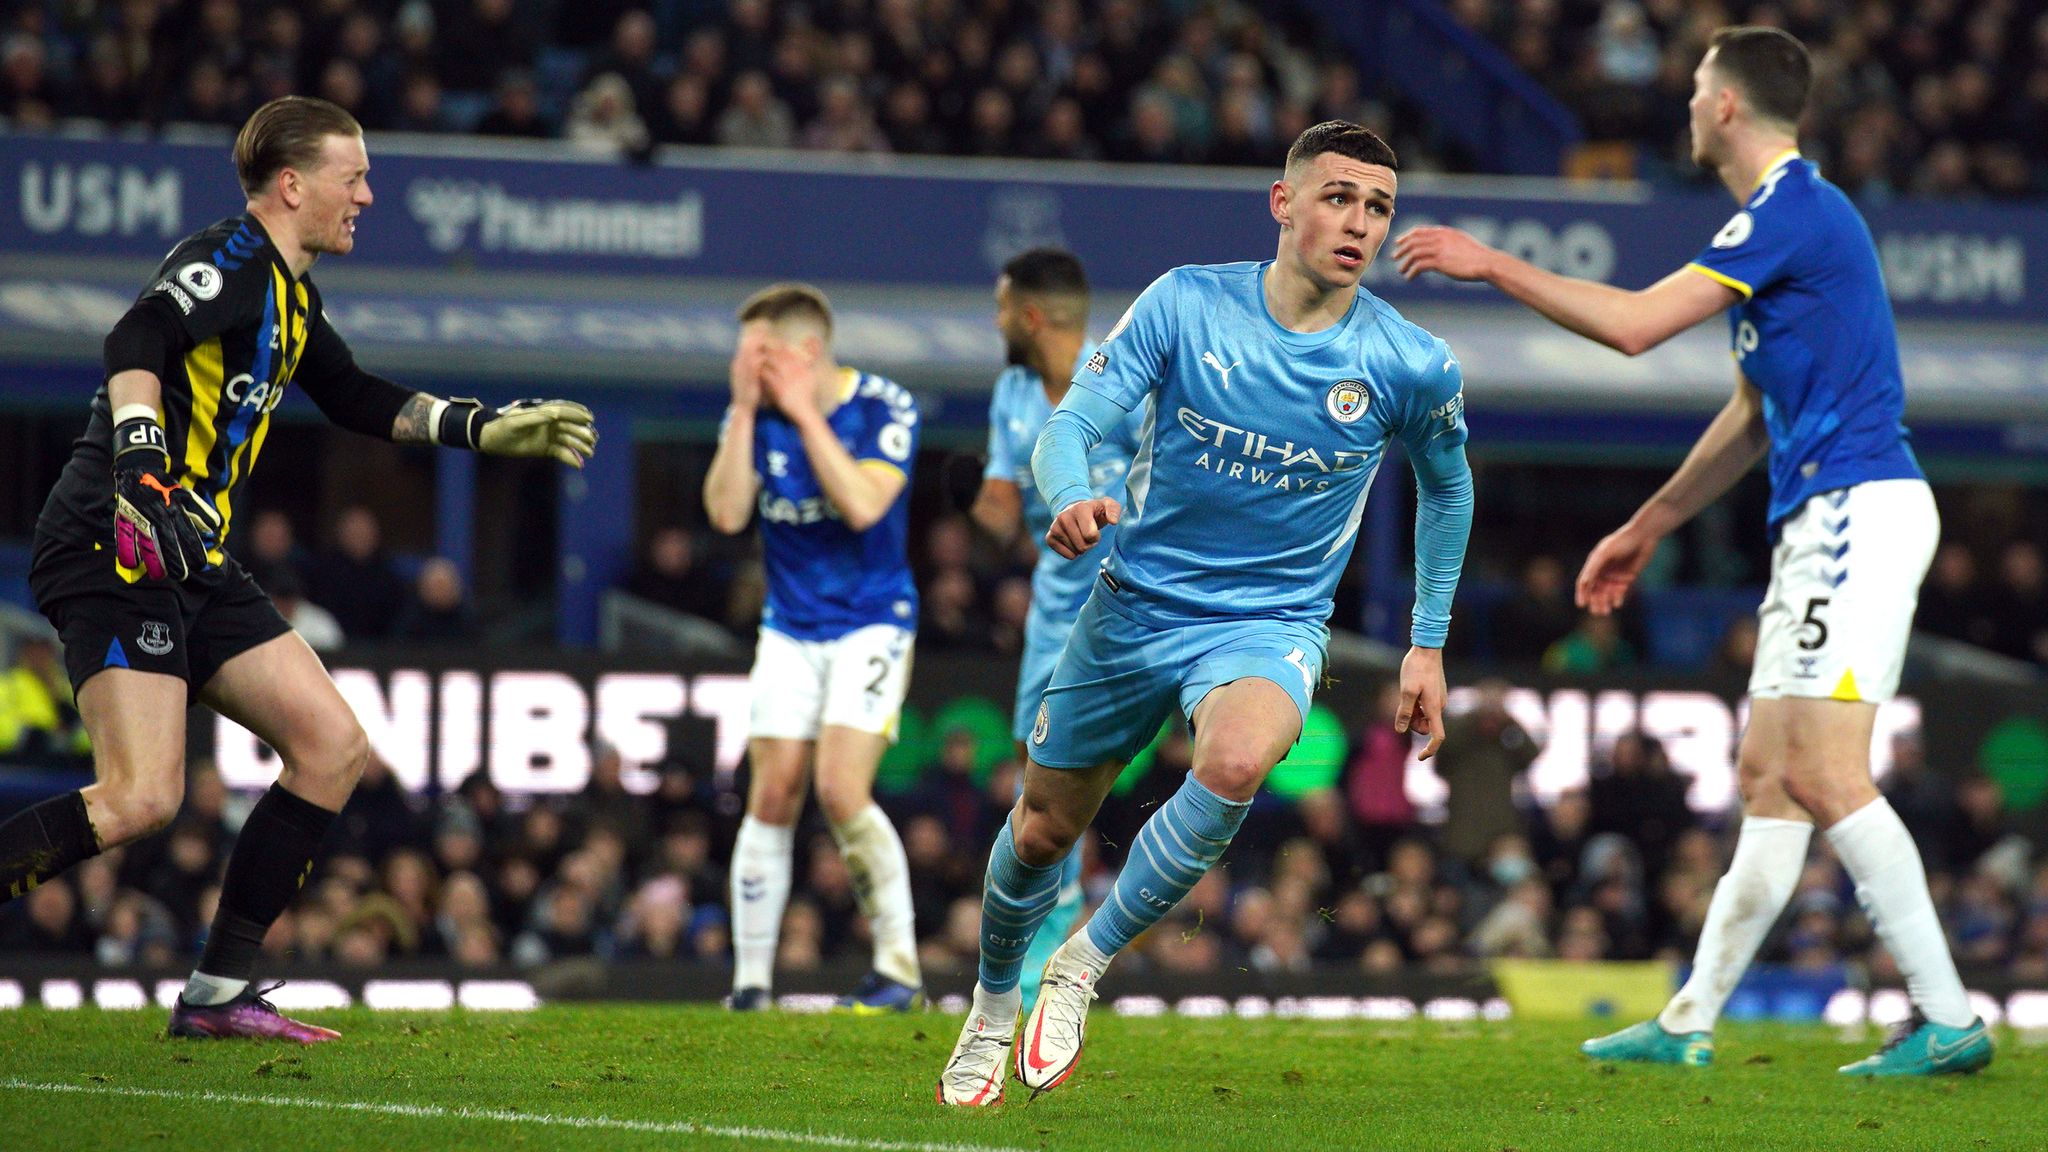 Everton 0-1 Man City Phil Fodens late breakthrough goal wins it as hosts are left to bemoan penalty decision Football News Sky Sports